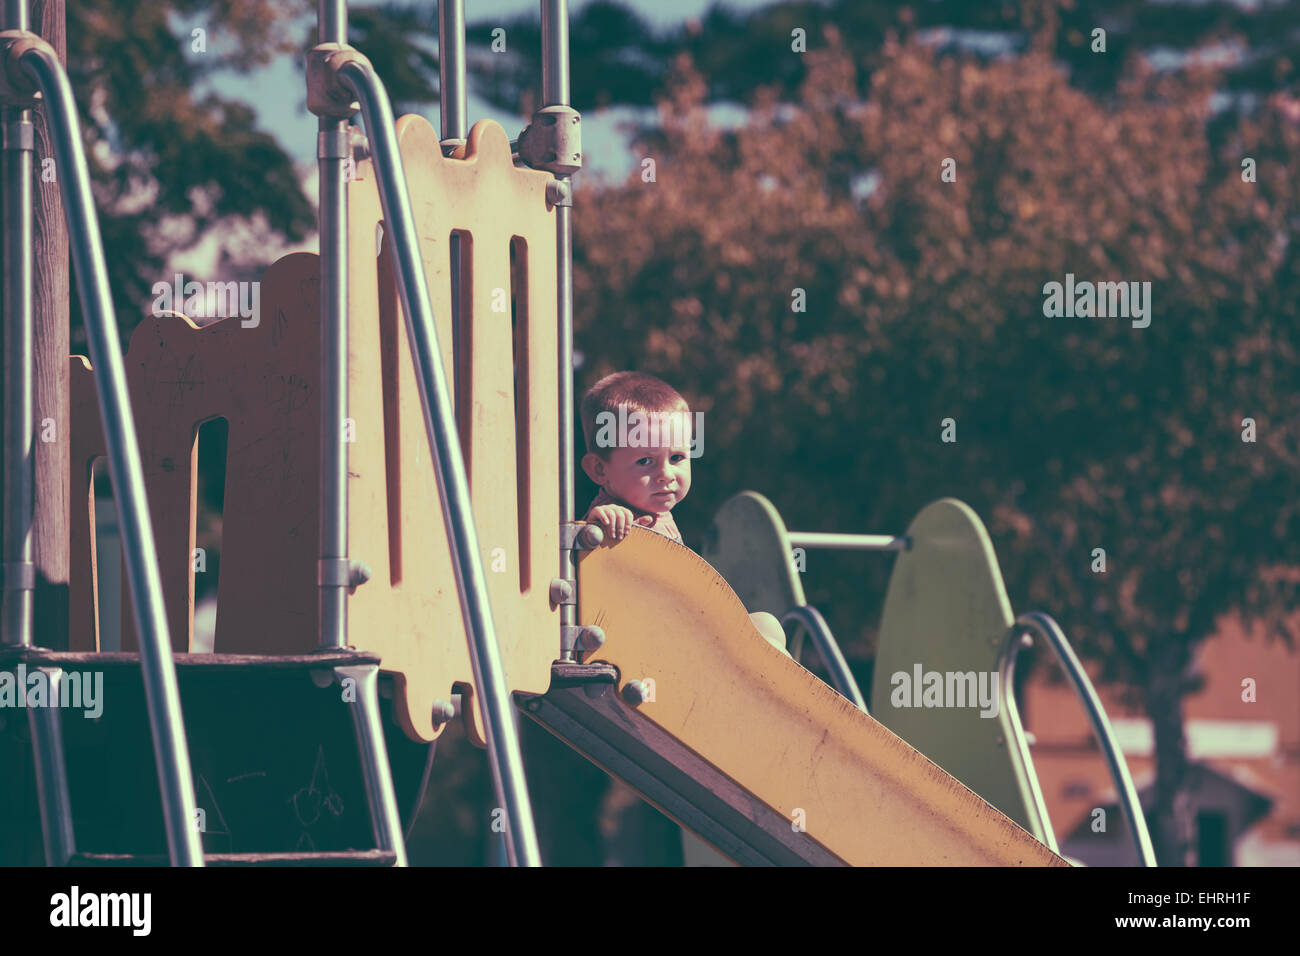 Vintage looking photo of a child boy on a slide at children playground. Stock Photo